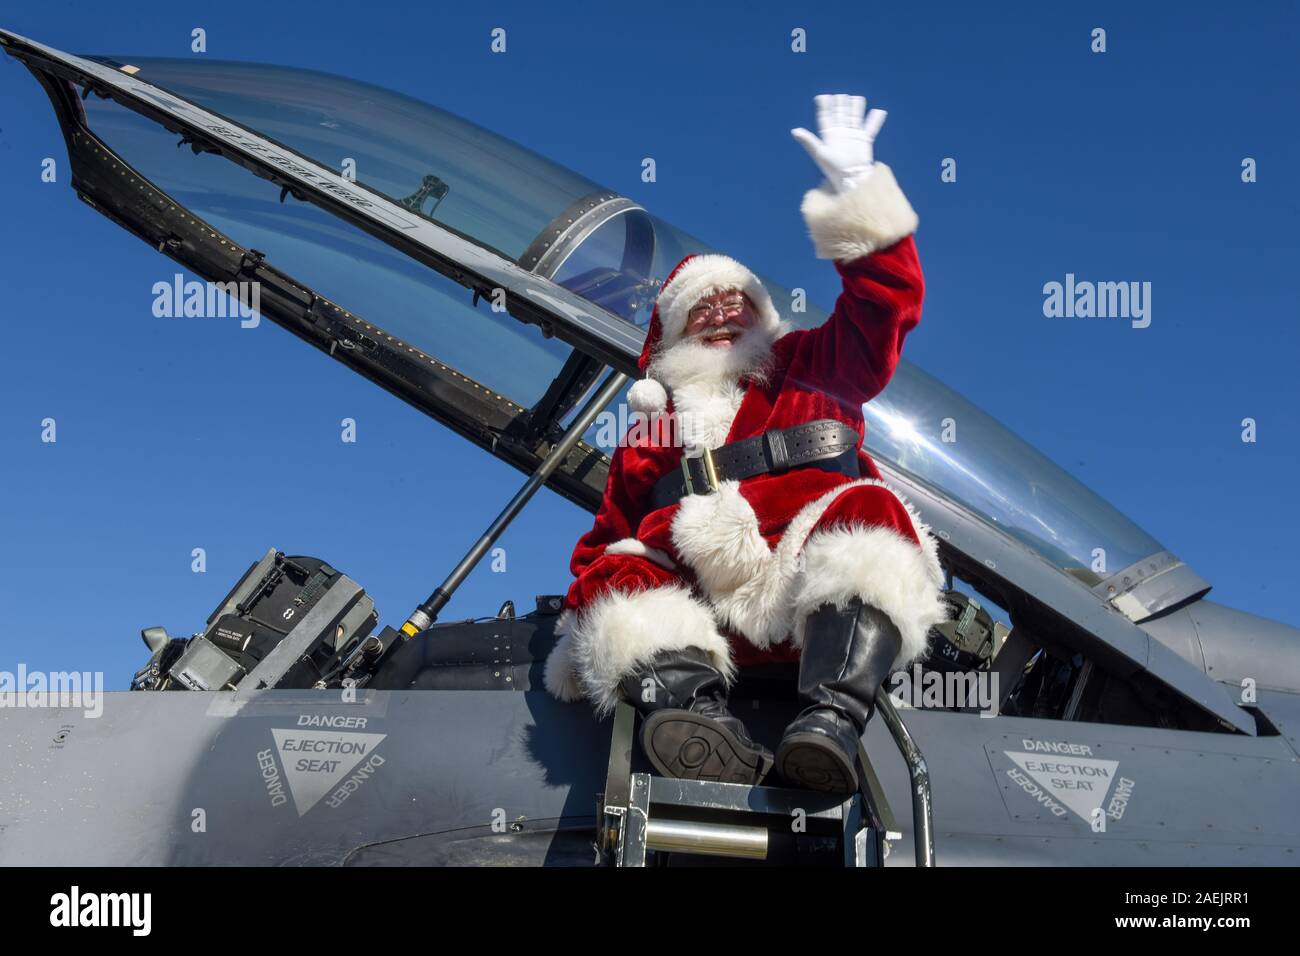 Santa Claus waves to service members and their families as he arrives in a U.S. Air Force F-16 Fighting Falcon fighter jet at McEntire Joint National Guard Base December 7, 2019 in Hopkins, South Carolina. Stock Photo